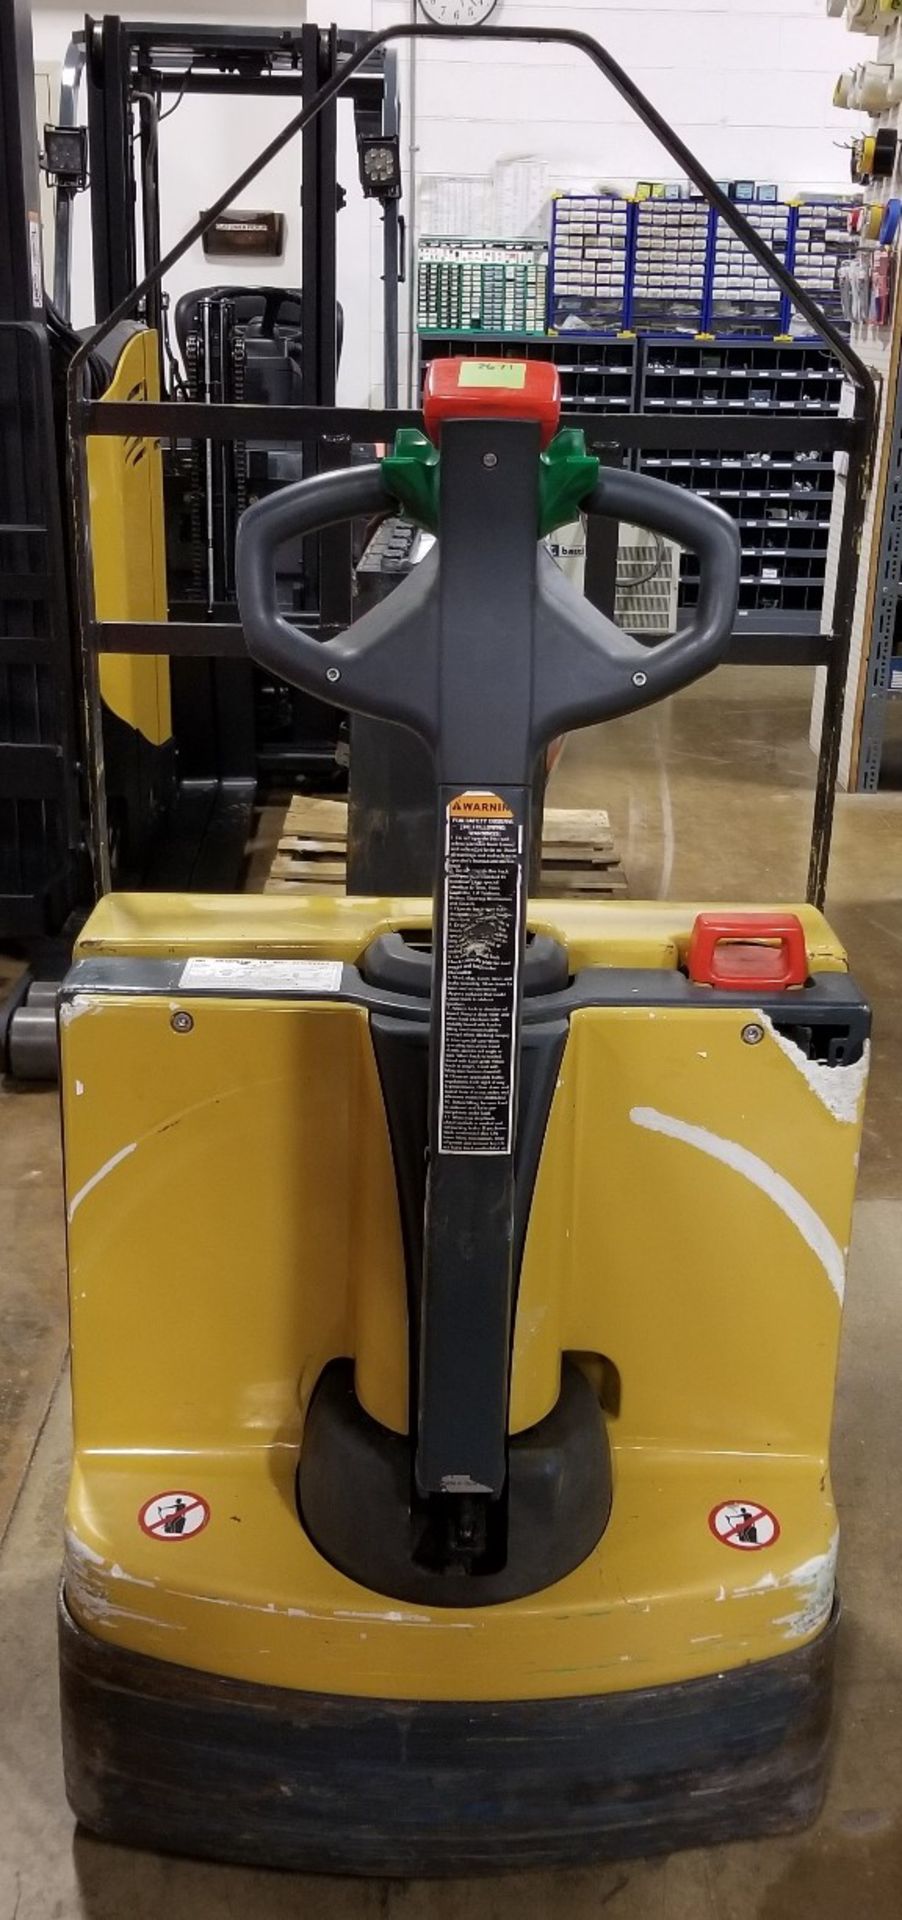 CATERPILLAR (2006) WP4500 24V ELECTRIC WALK-BEHIND PALLET JACK WITH 4500 LB. CAPACITY, BUILT-IN - Image 2 of 2